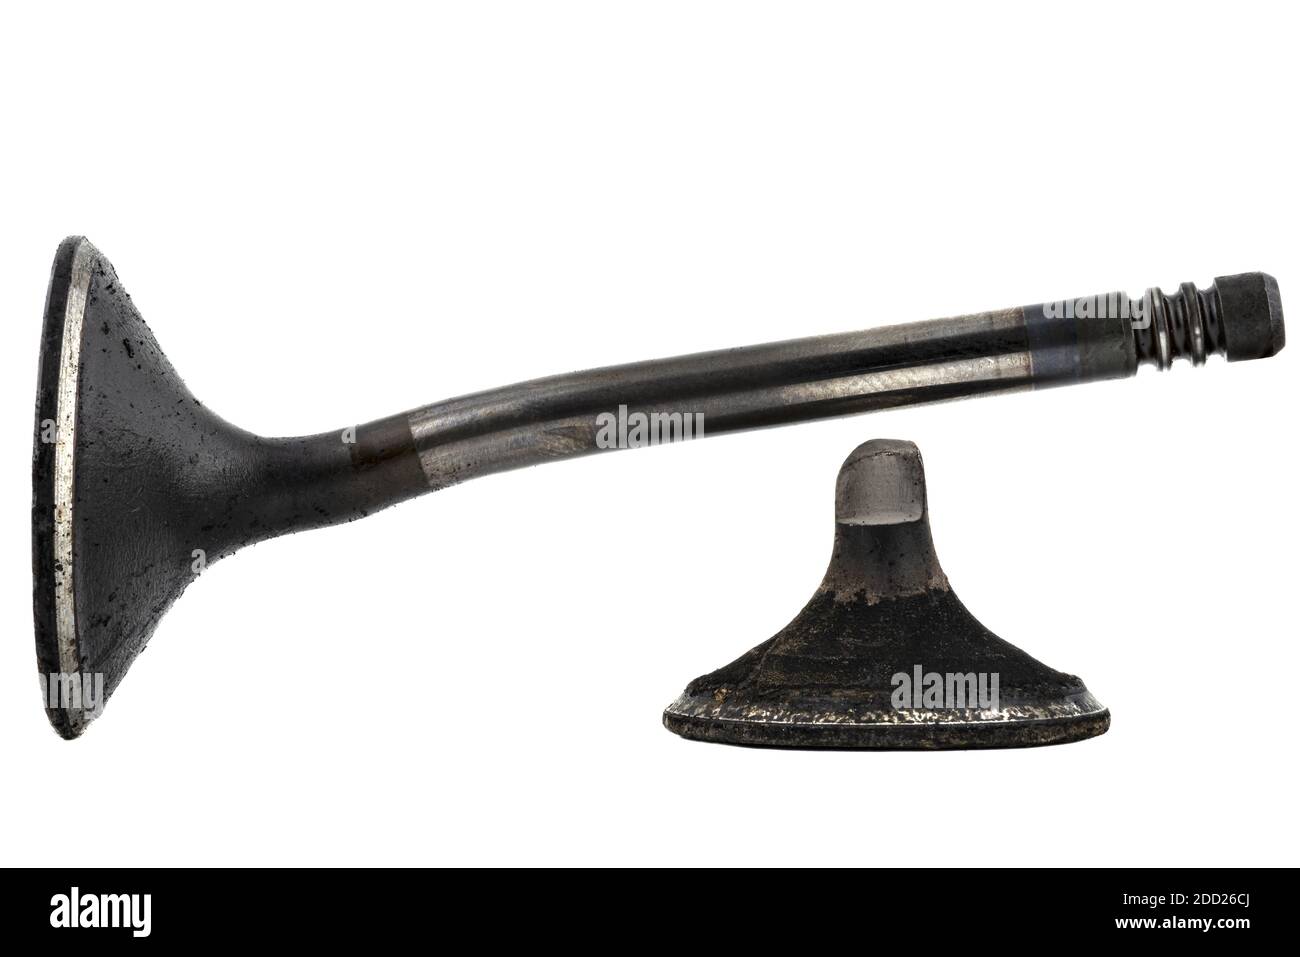 Warped and cracked engine valve spindle made of heat-resistant steel, covered with soot, isolated on a white background. Stock Photo